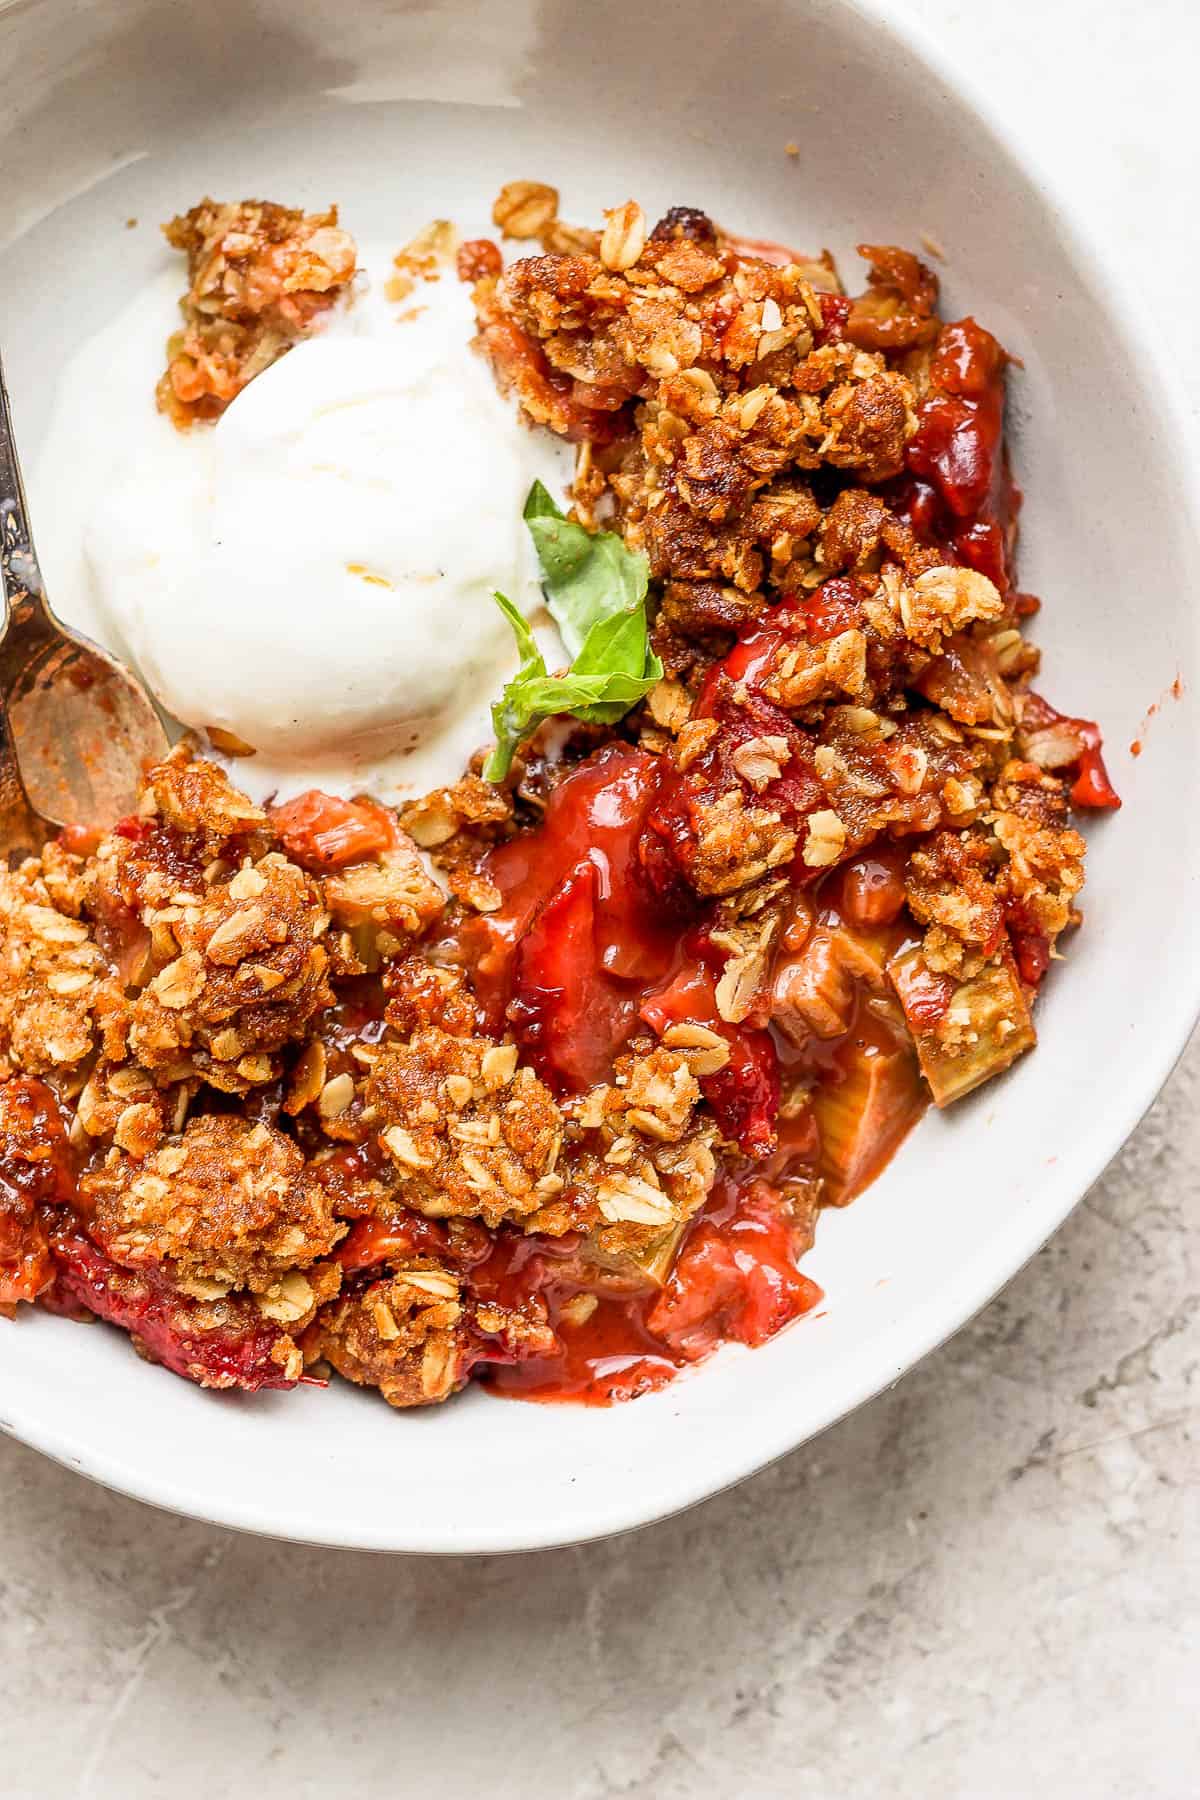 Strawberry rhubarb crisp topped with a scoop of vanilla ice cream in a bowl.